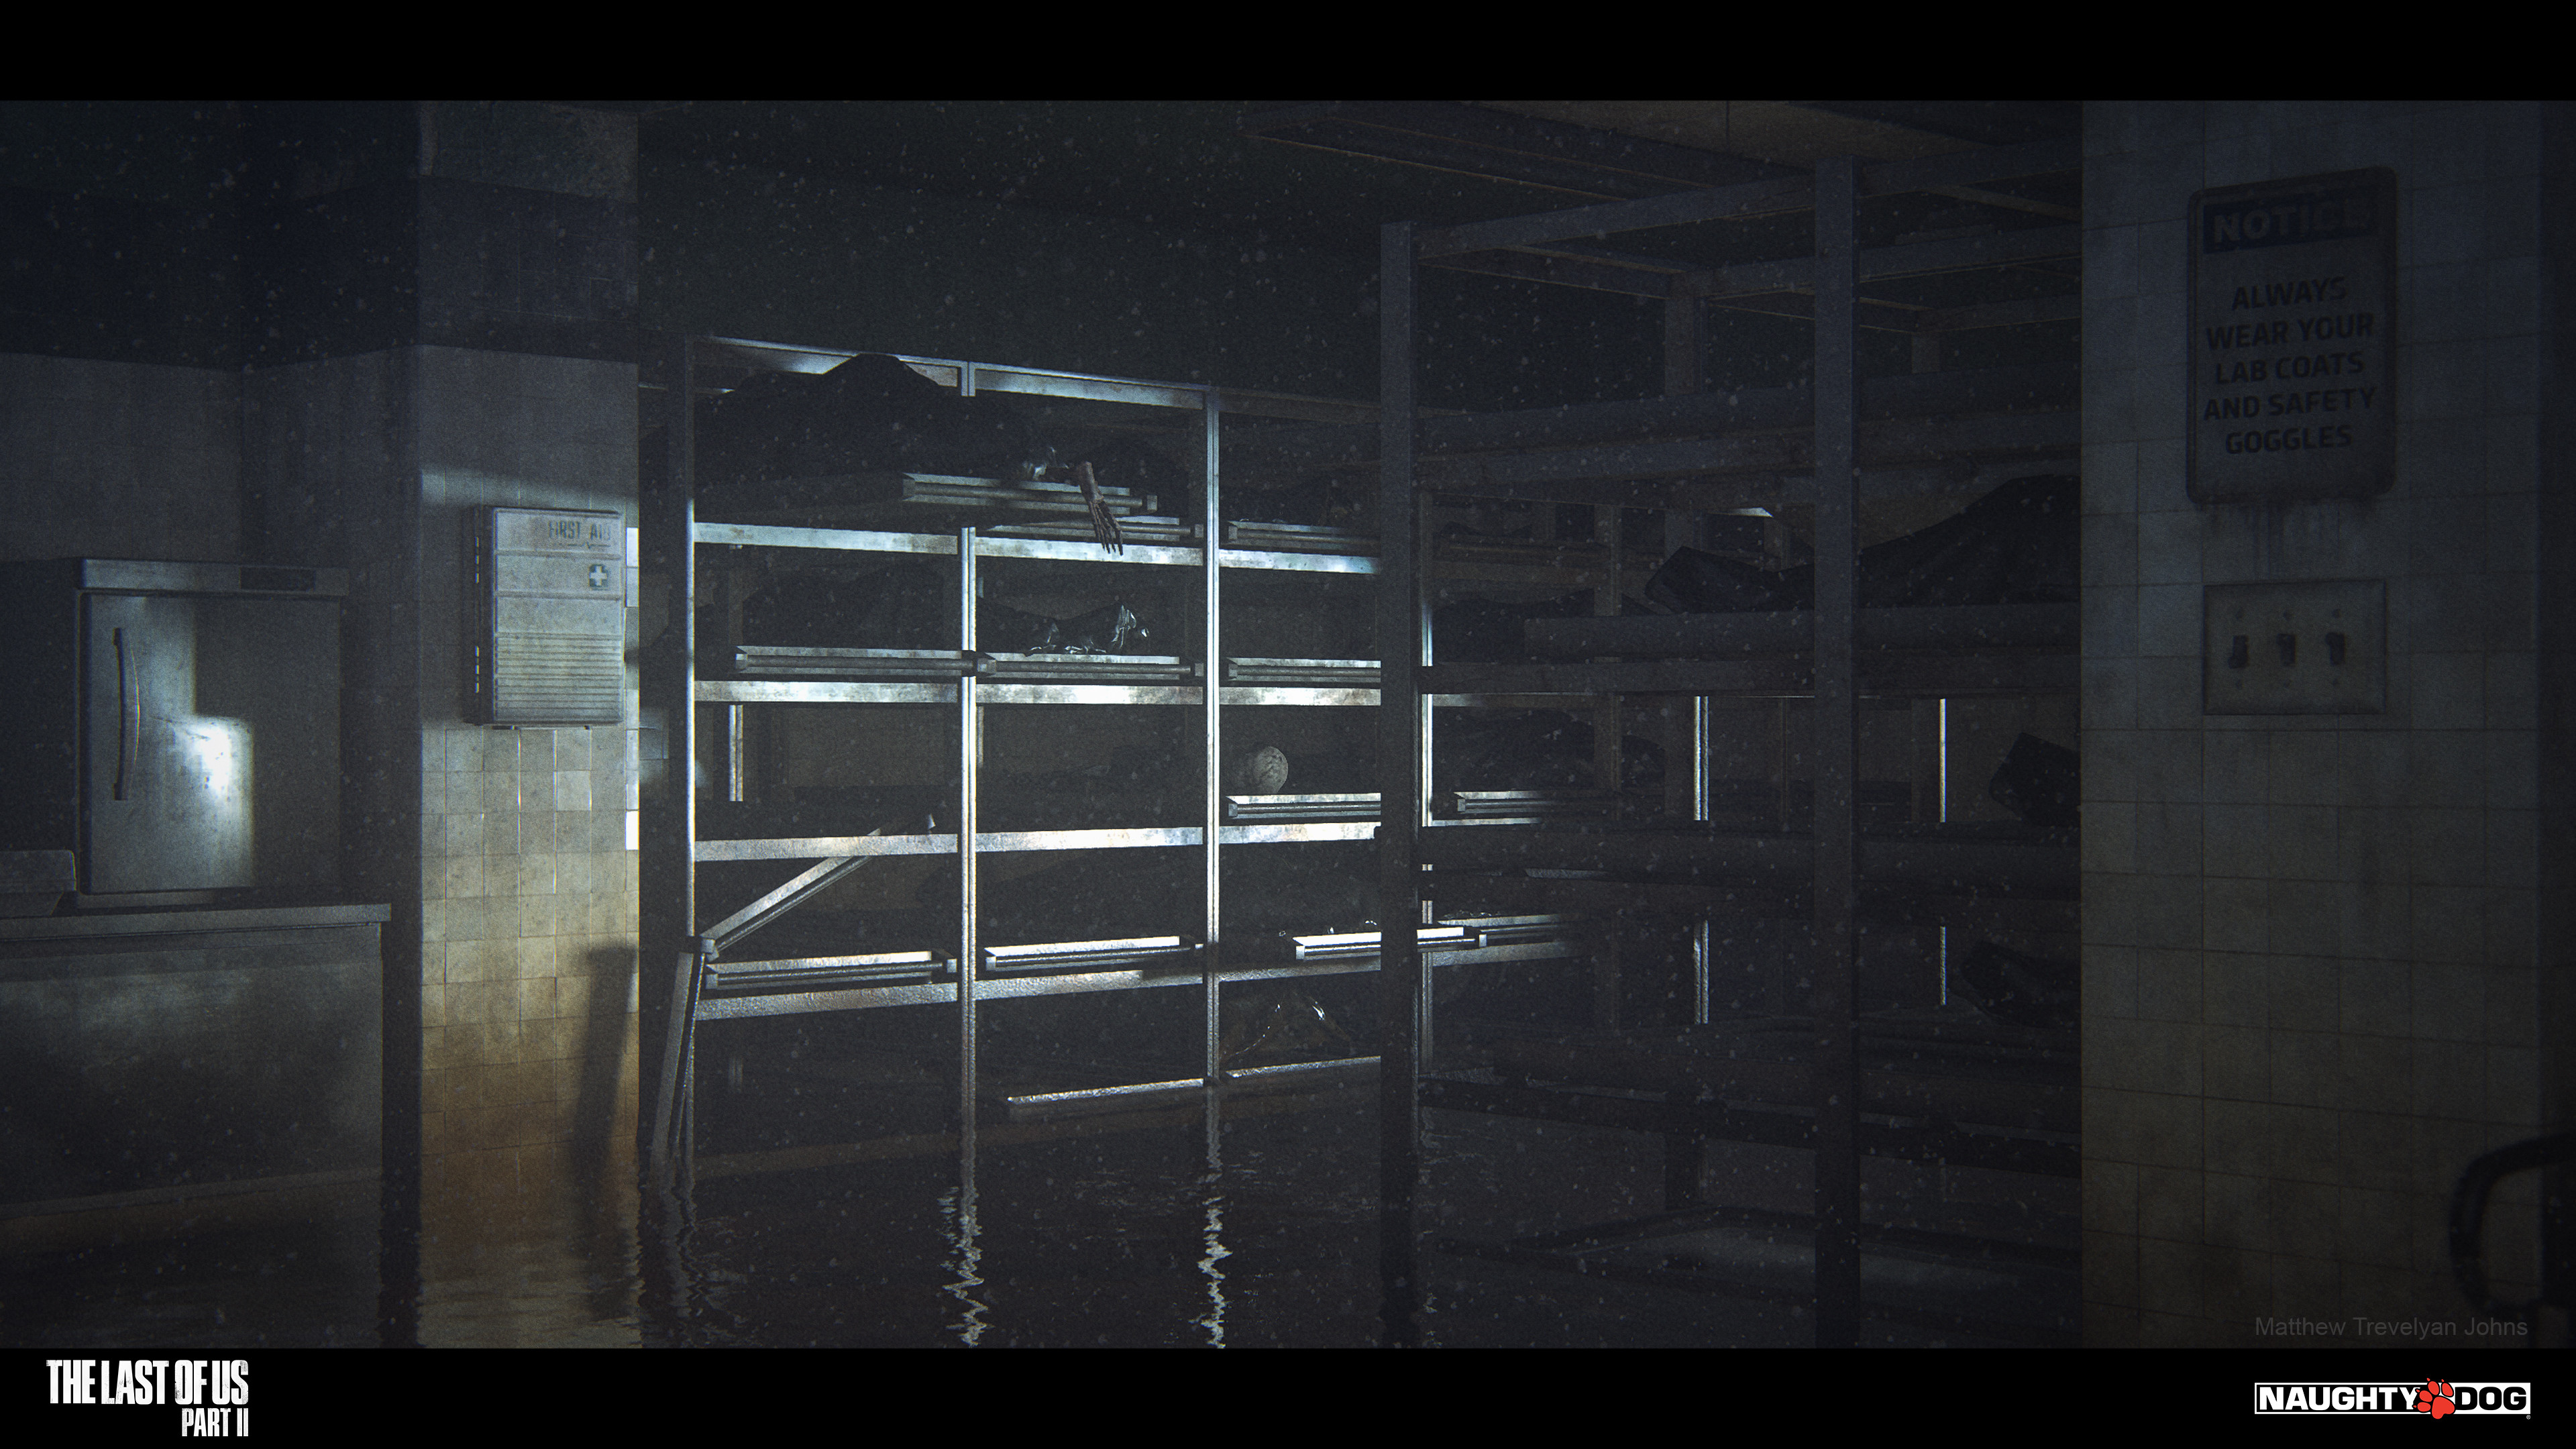 The metal racks laden with body bags was a particularly creepy detail here, not just because of the theme, but also because they cast interesting and broken shadows throughout the space when hit by the flashlight